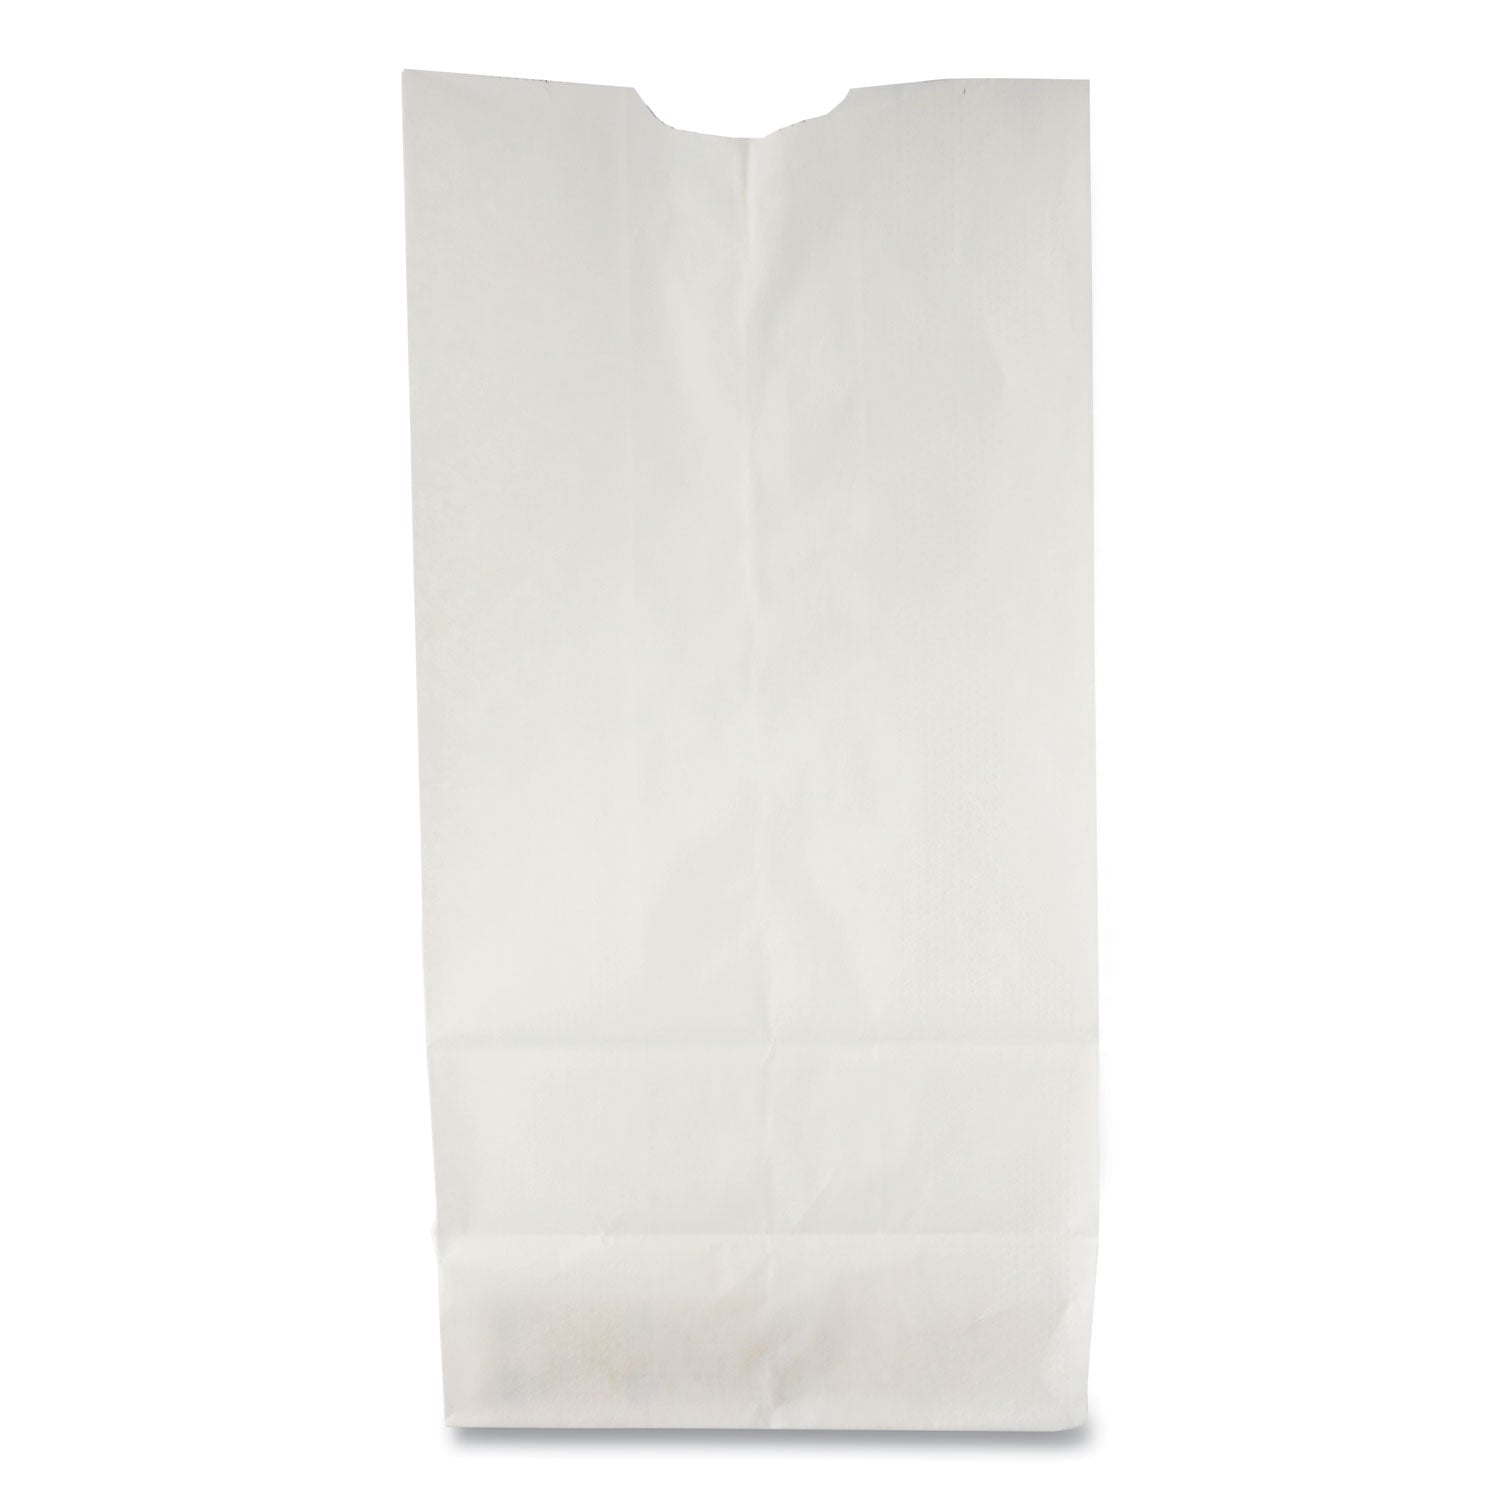 grocery-paper-bags-35-lb-capacity-#6-6-x-363-x-1106-white-500-bags_baggw6500 - 1